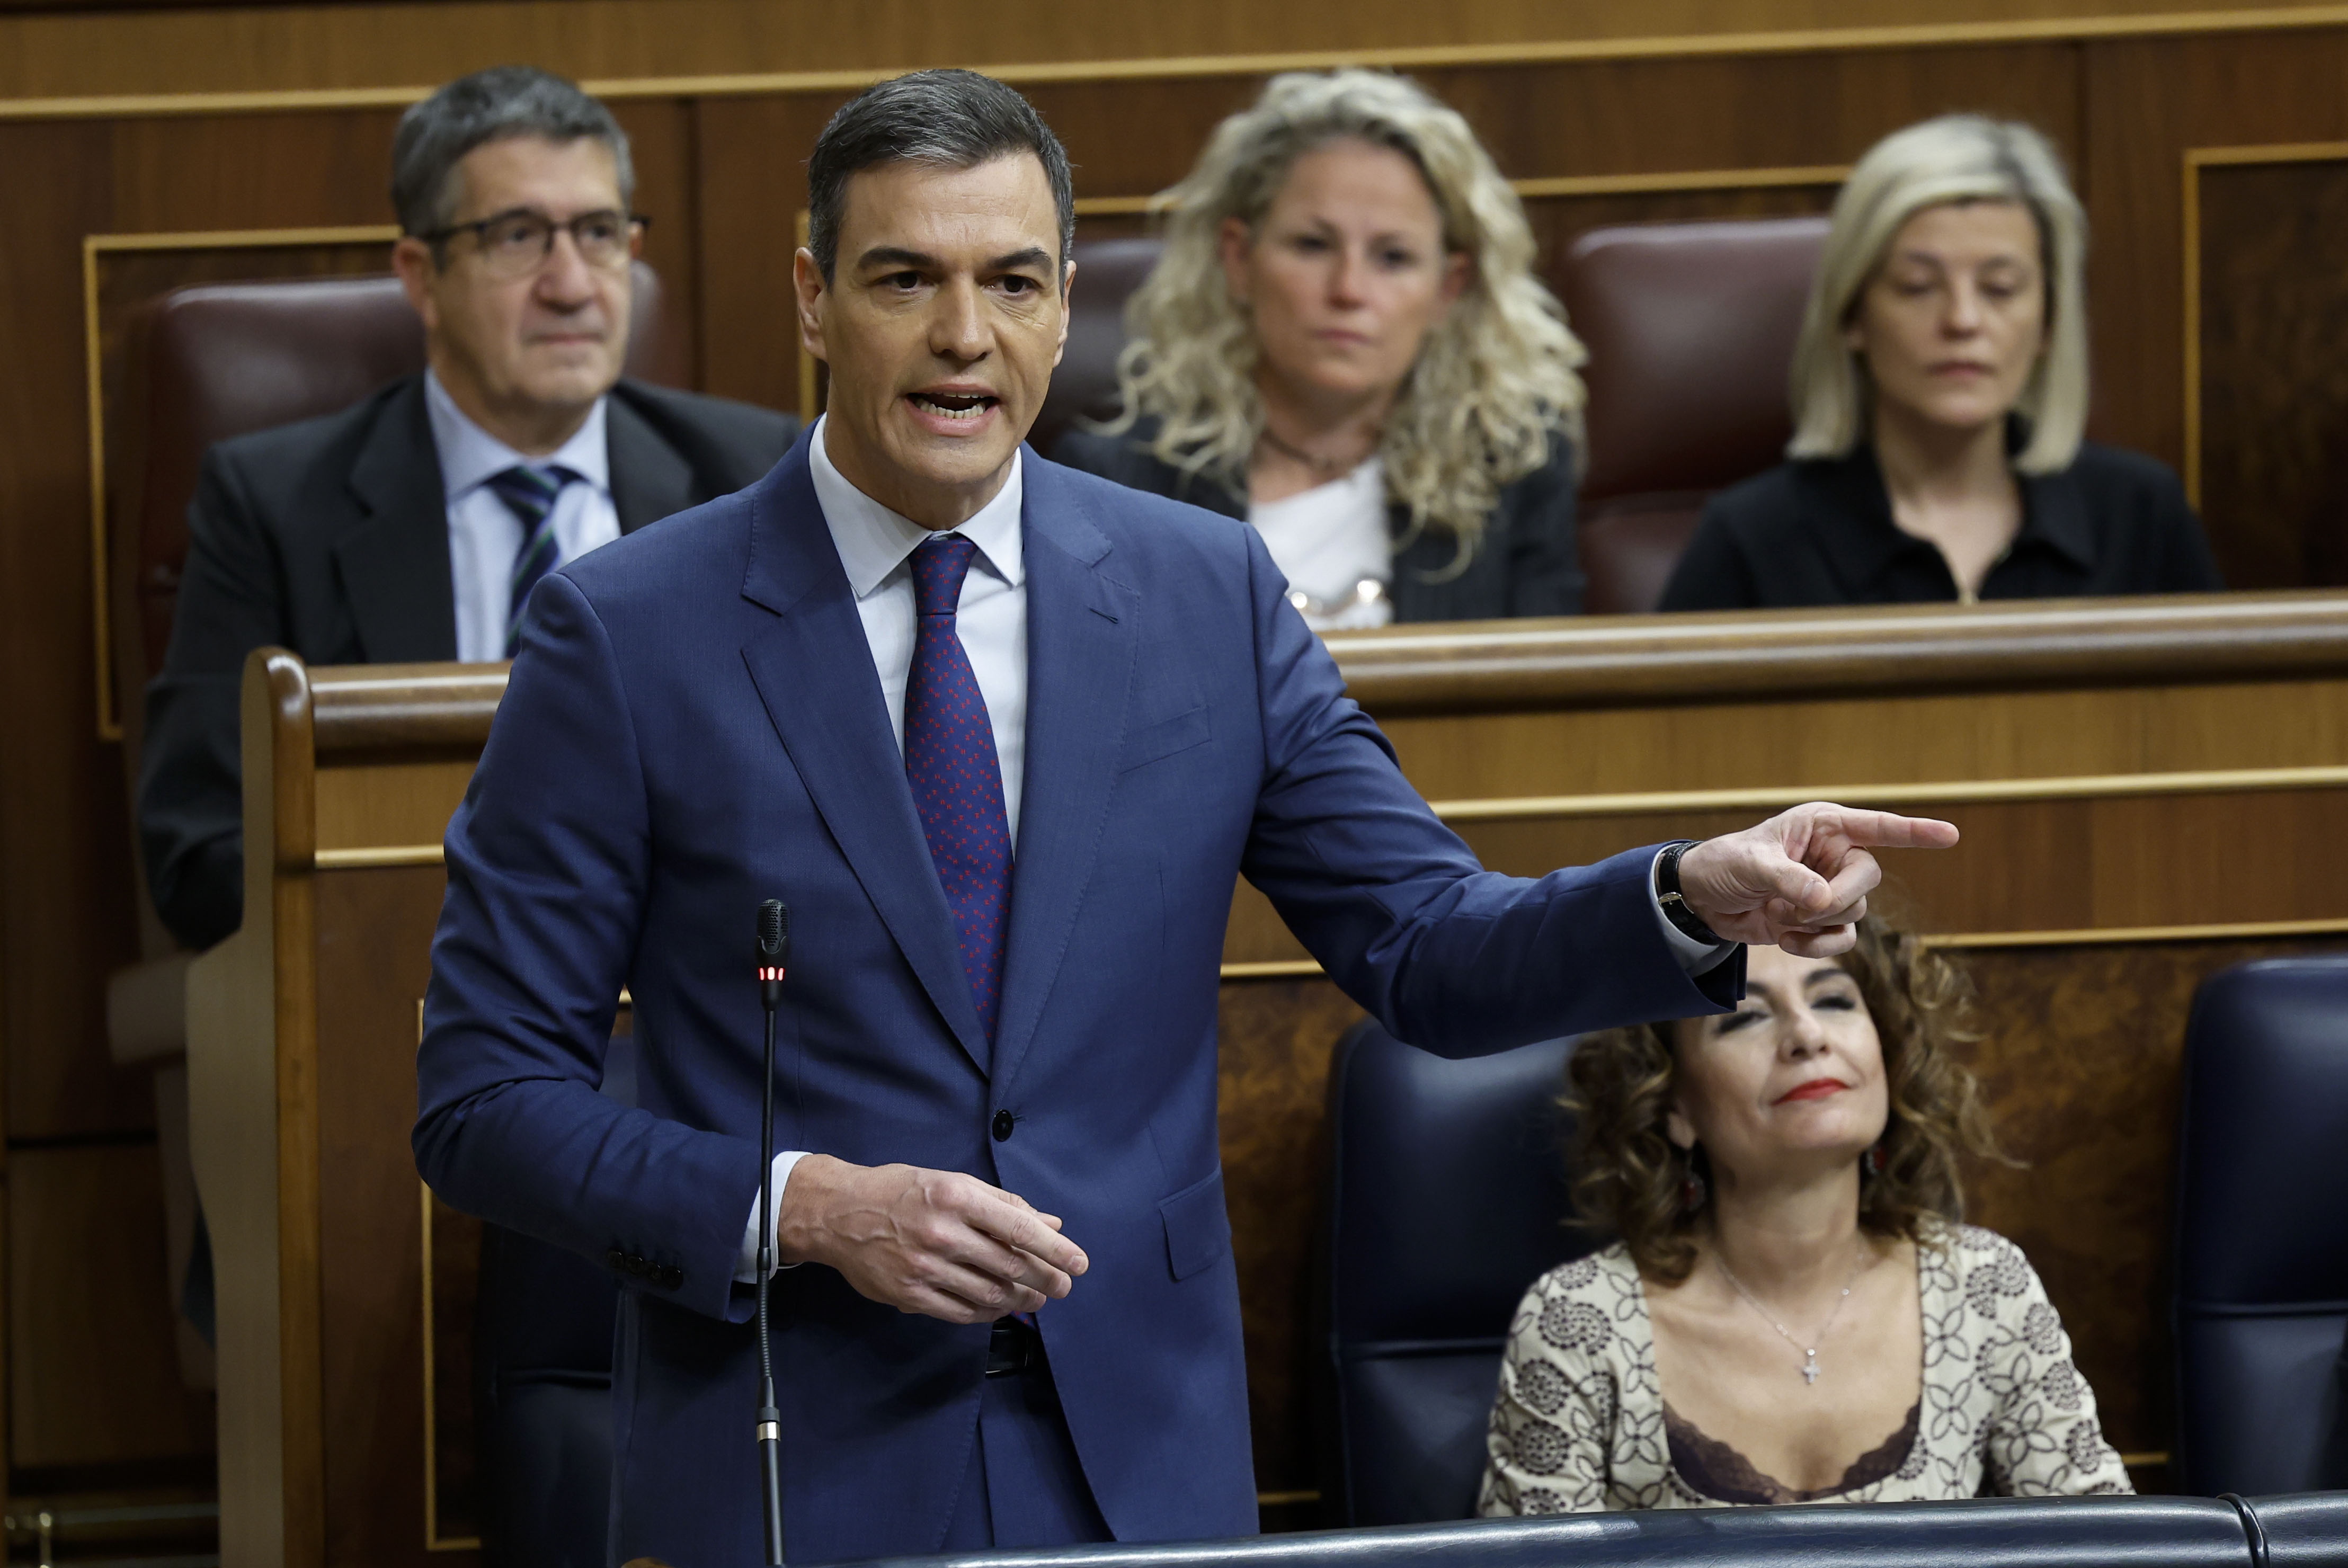 Sánchez has been criticised on many fronts for the controversial amnesty laws